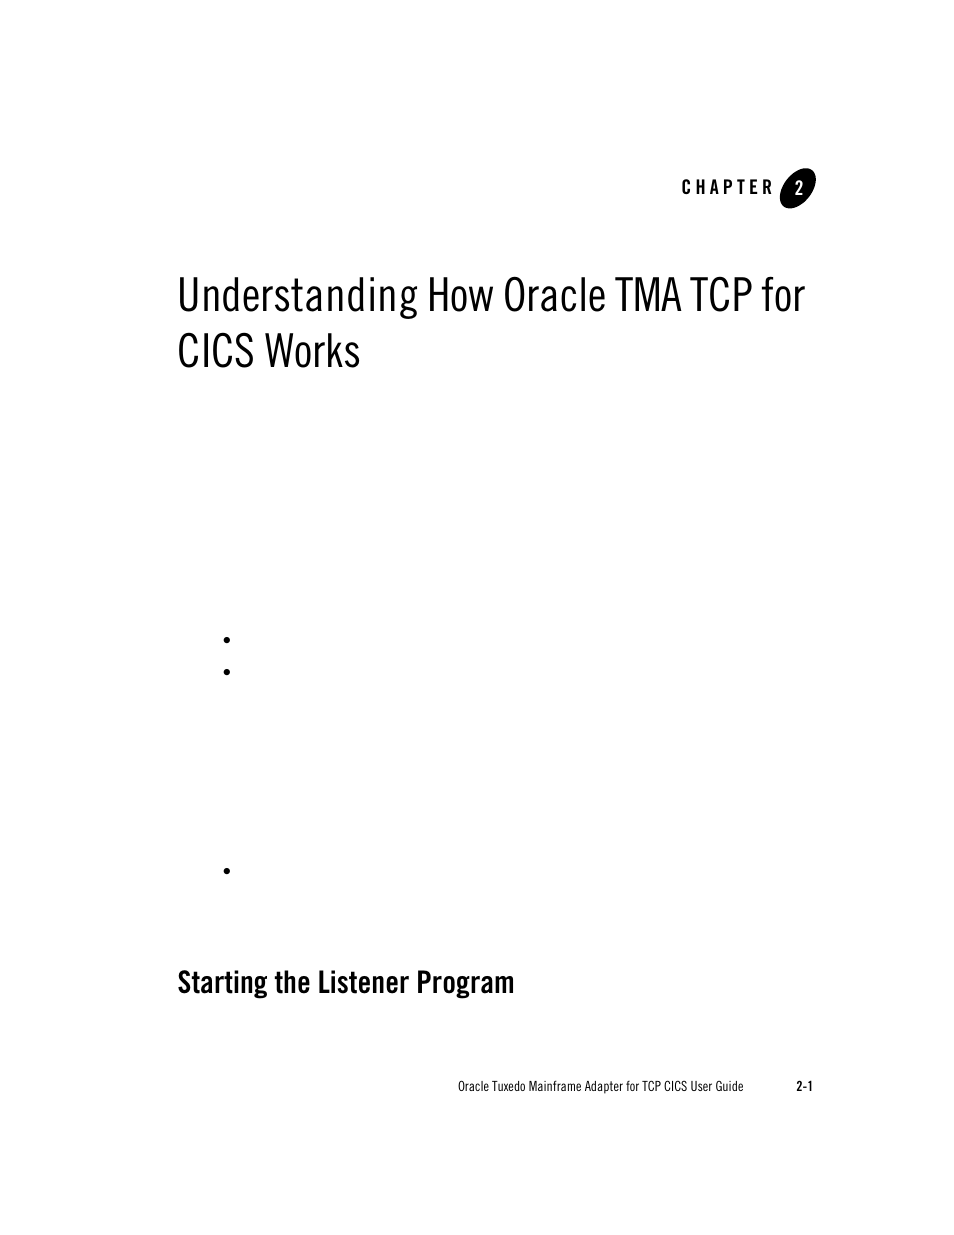 Understanding how oracle tma tcp for cics works, Starting the listener program | Oracle Audio Technologies Oracle Tuxedo User Manual | Page 19 / 112